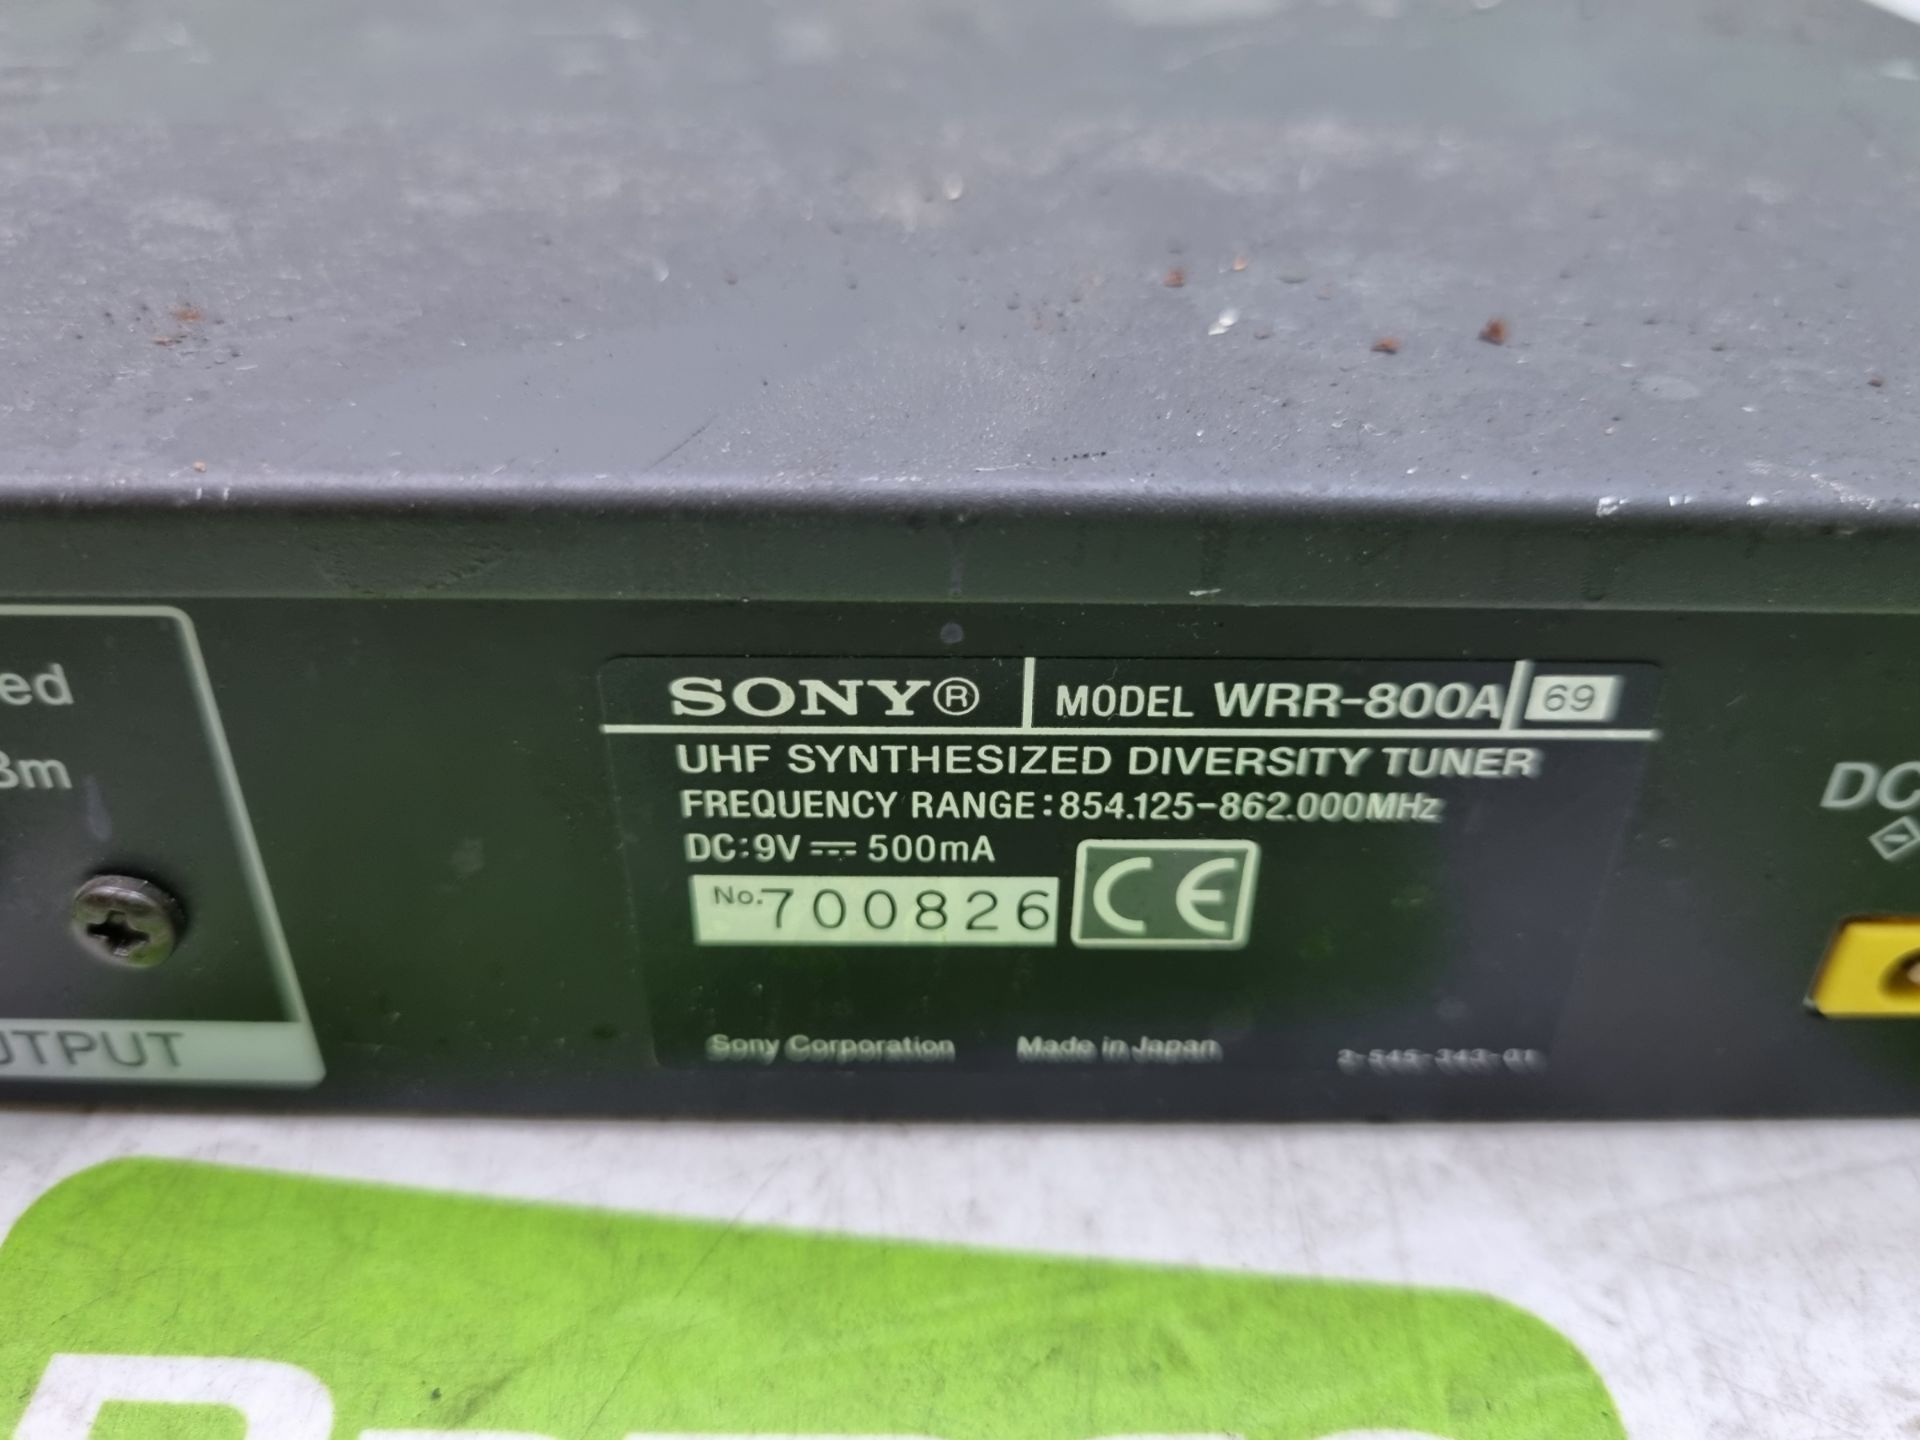 Sony WRR-800A UHF synthesized diversity tuner - L22 x W26 x H5cm - Image 4 of 4